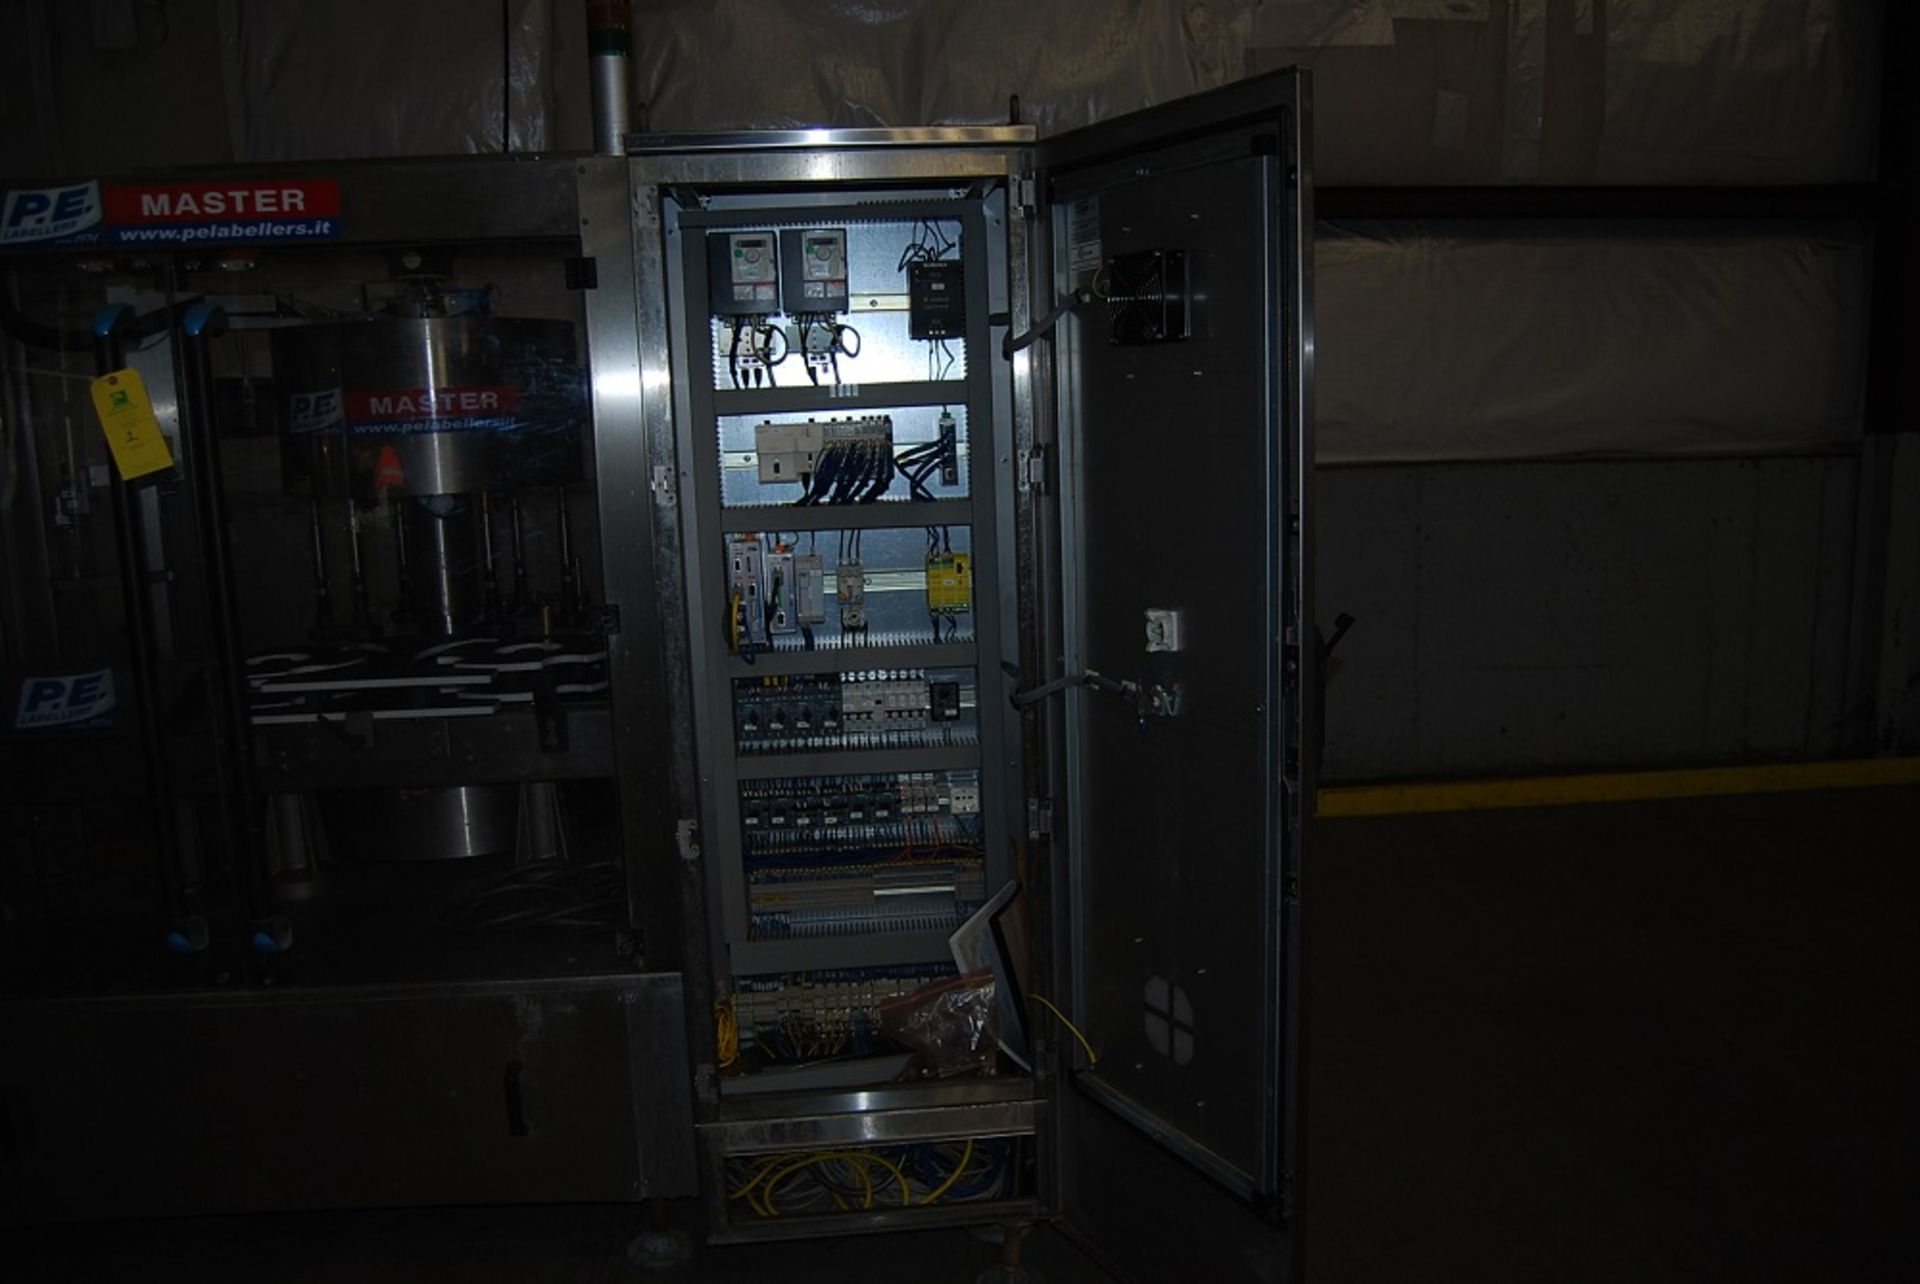 PE Labeler, Model: Master M-S 540/6T/2S-2E. SN: Y271011390 480 Volts, 3 Phase 60 HZ, MFG: 2013 - Image 9 of 25